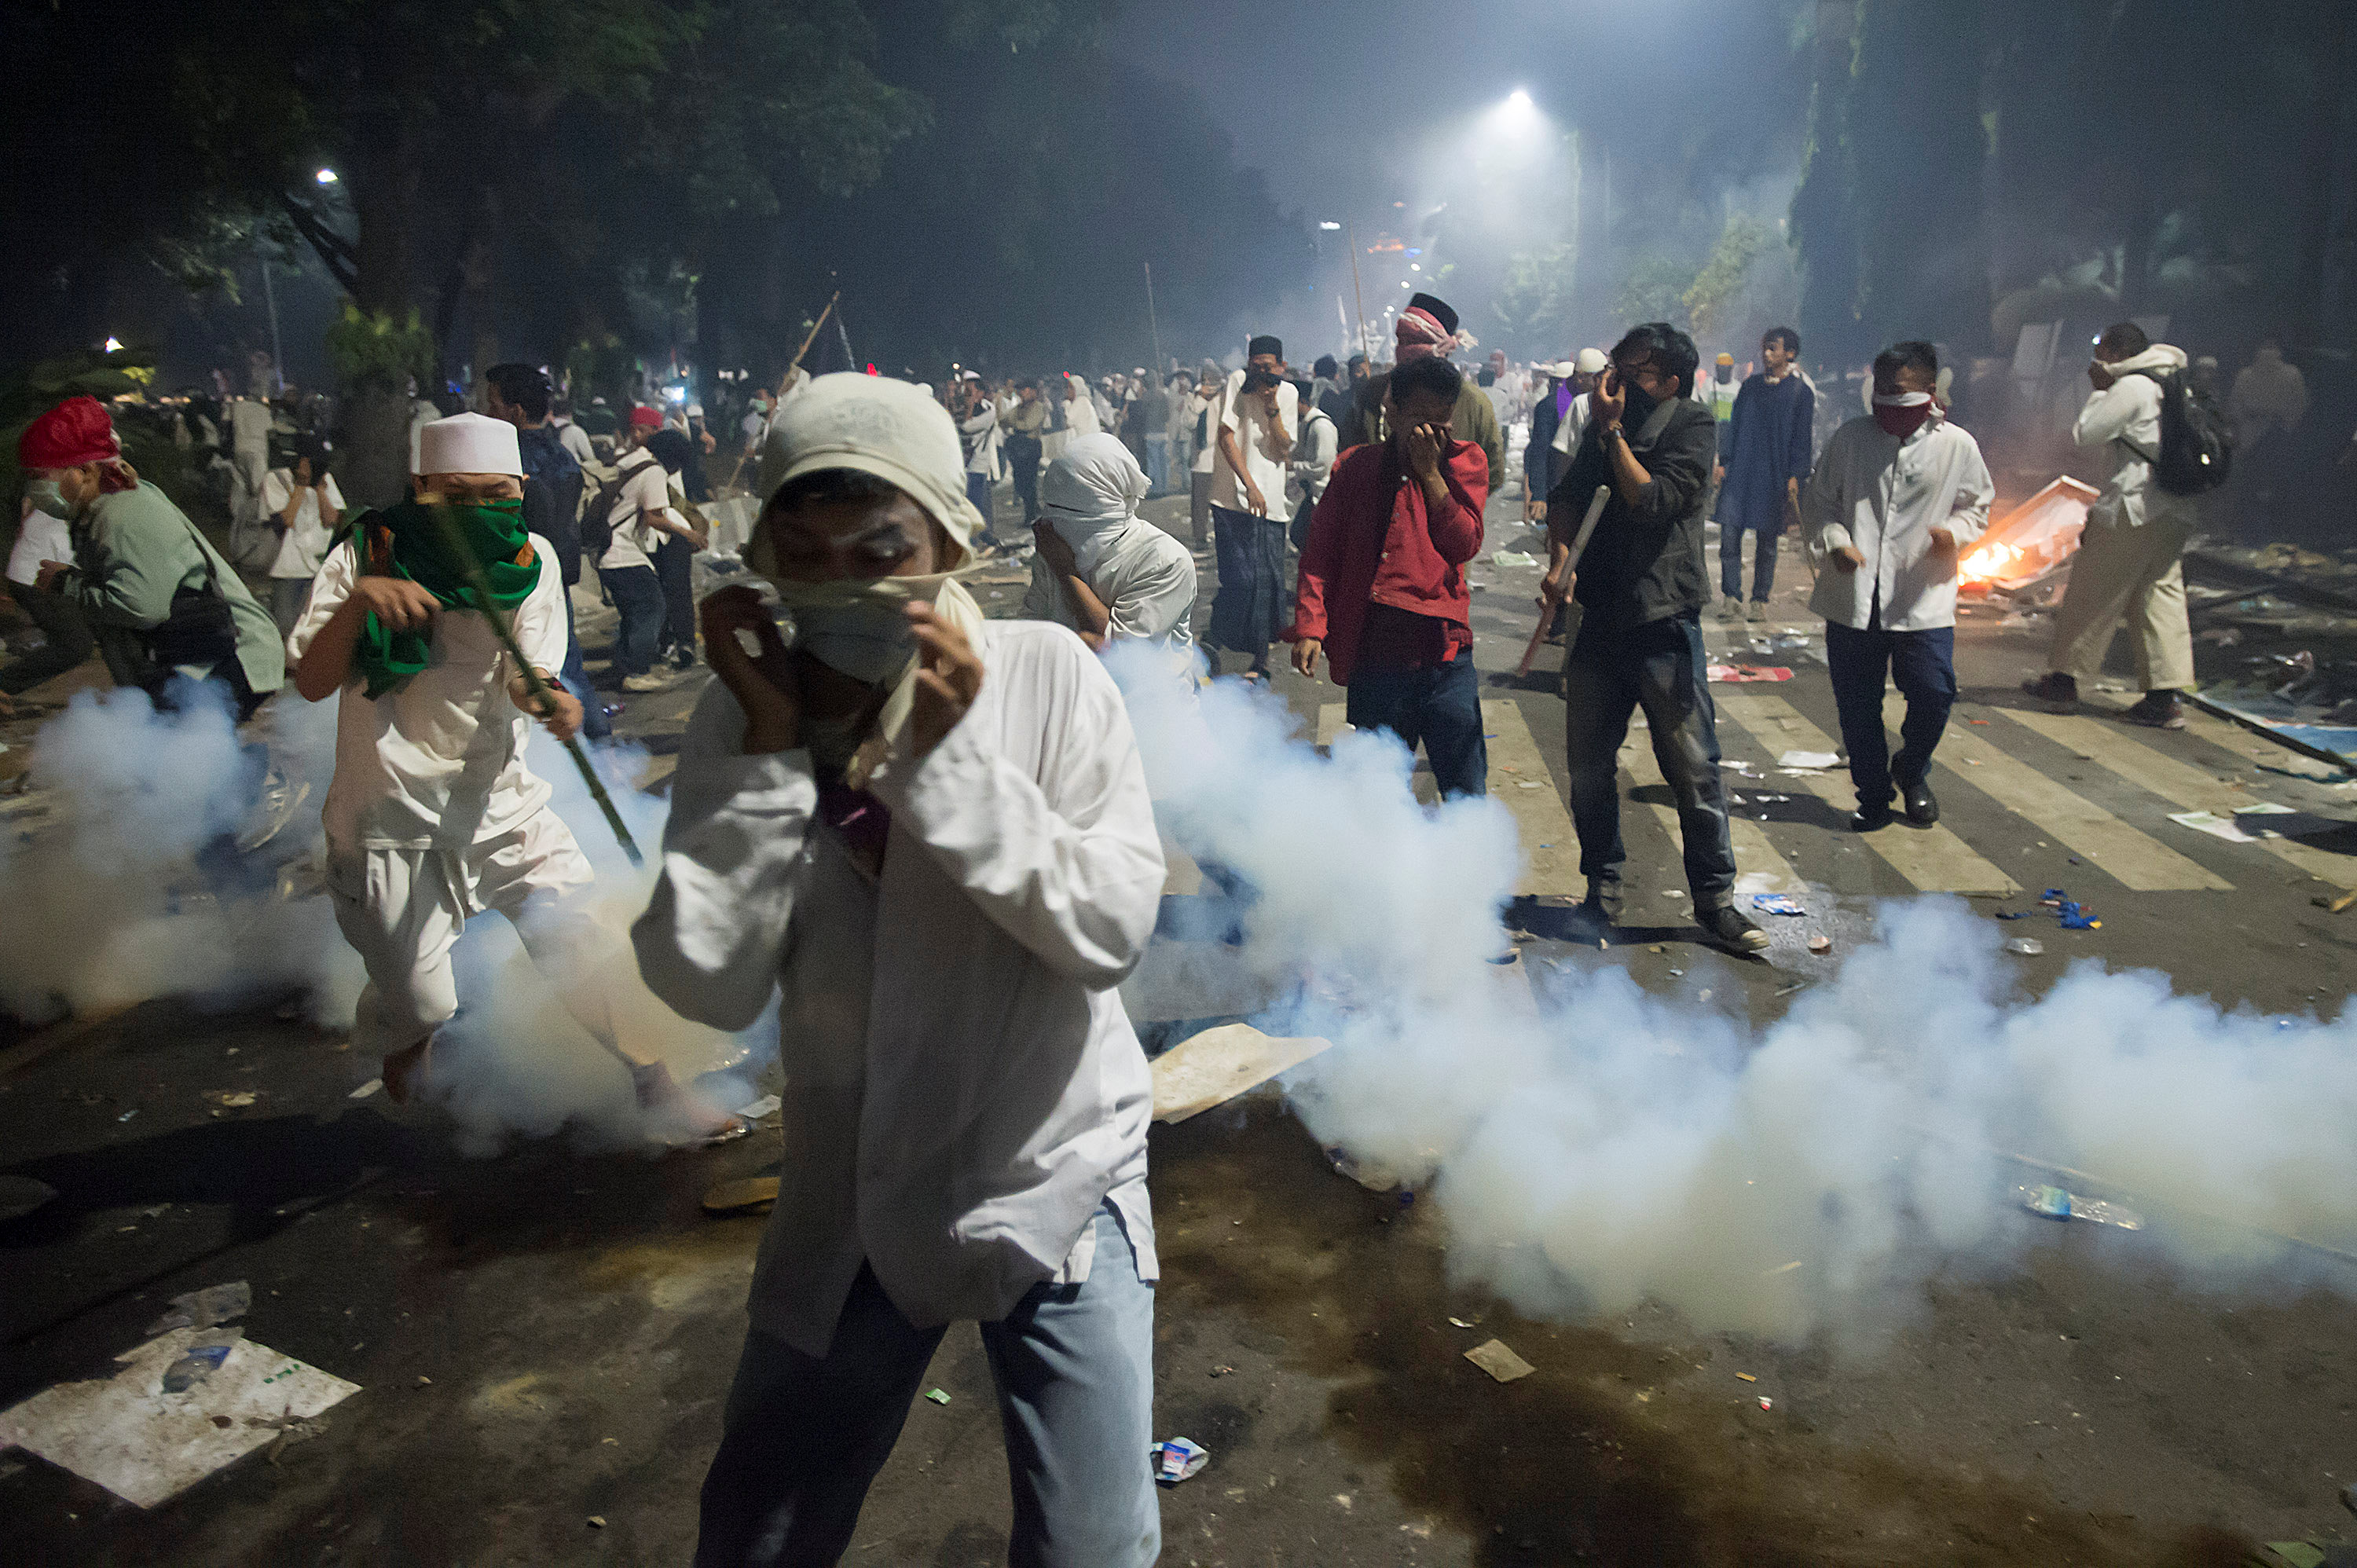 Muslim hardline protesters cover their faces as police fire tear gas during a protest against Jakarta's incumbent governor Basuki (Ahok) Tjahaja Purnama, an ethnic Chinese Christian running in the upcoming election, in Jakarta, Indonesia, November 4, 2016